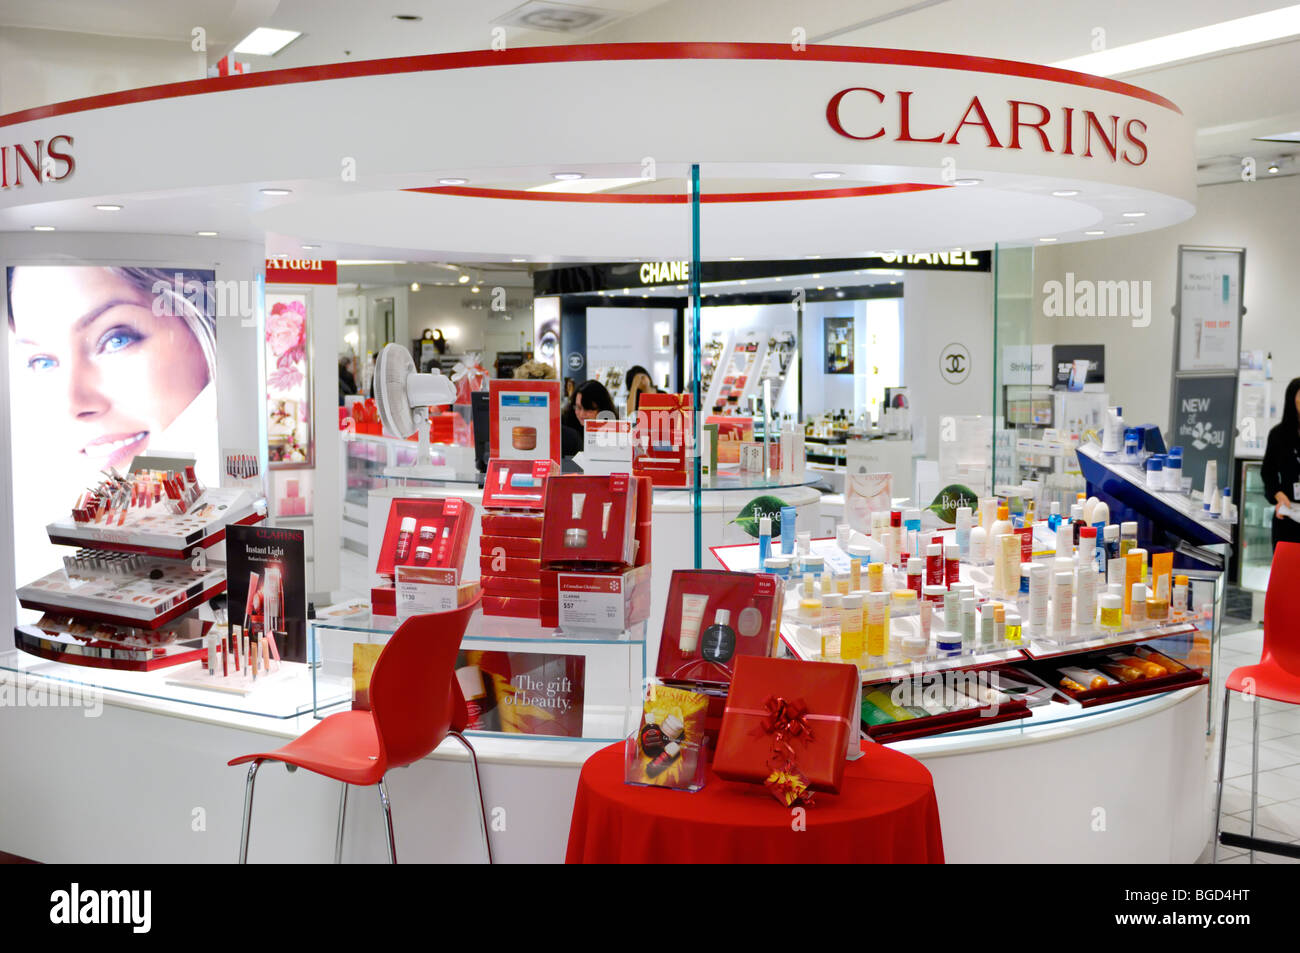 Clarins cosmetics and makeup display in a shopping mall in Toronto, Canada  Stock Photo - Alamy